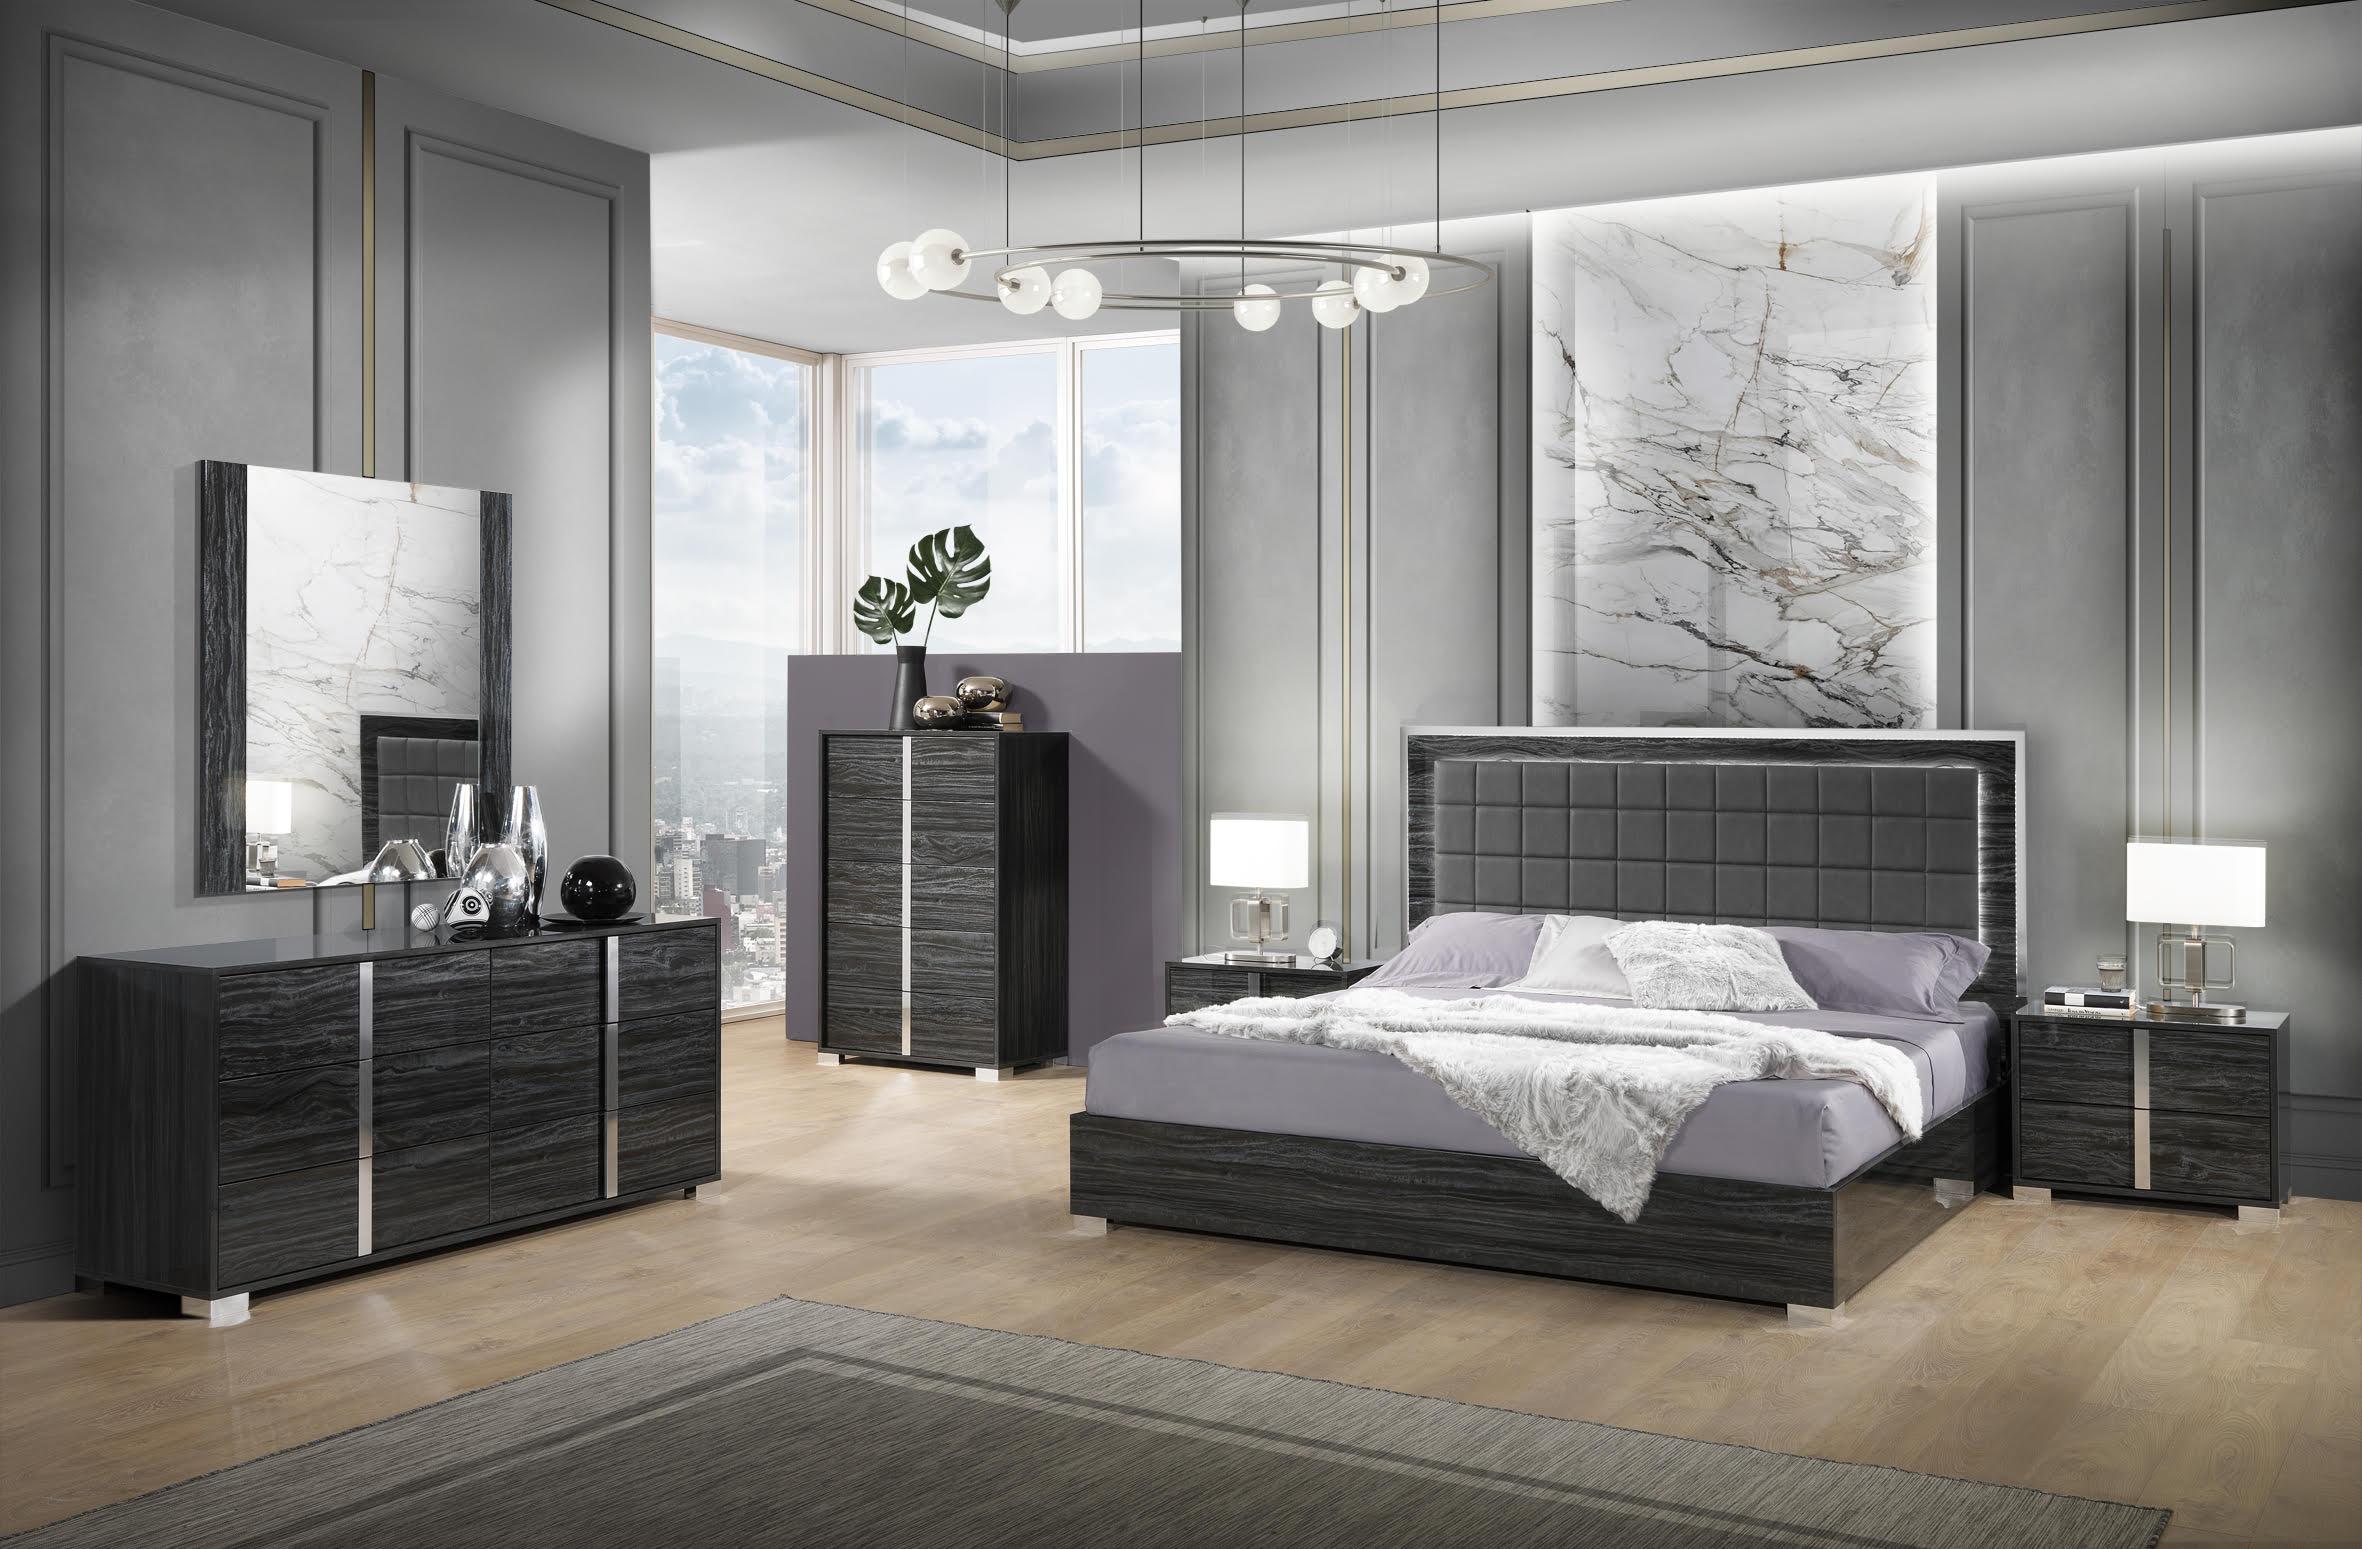 

    
Contemporary Queen Size Bedroom Set 6Pcs in Gloss Grey MADE IN ITALY J&M Alice
